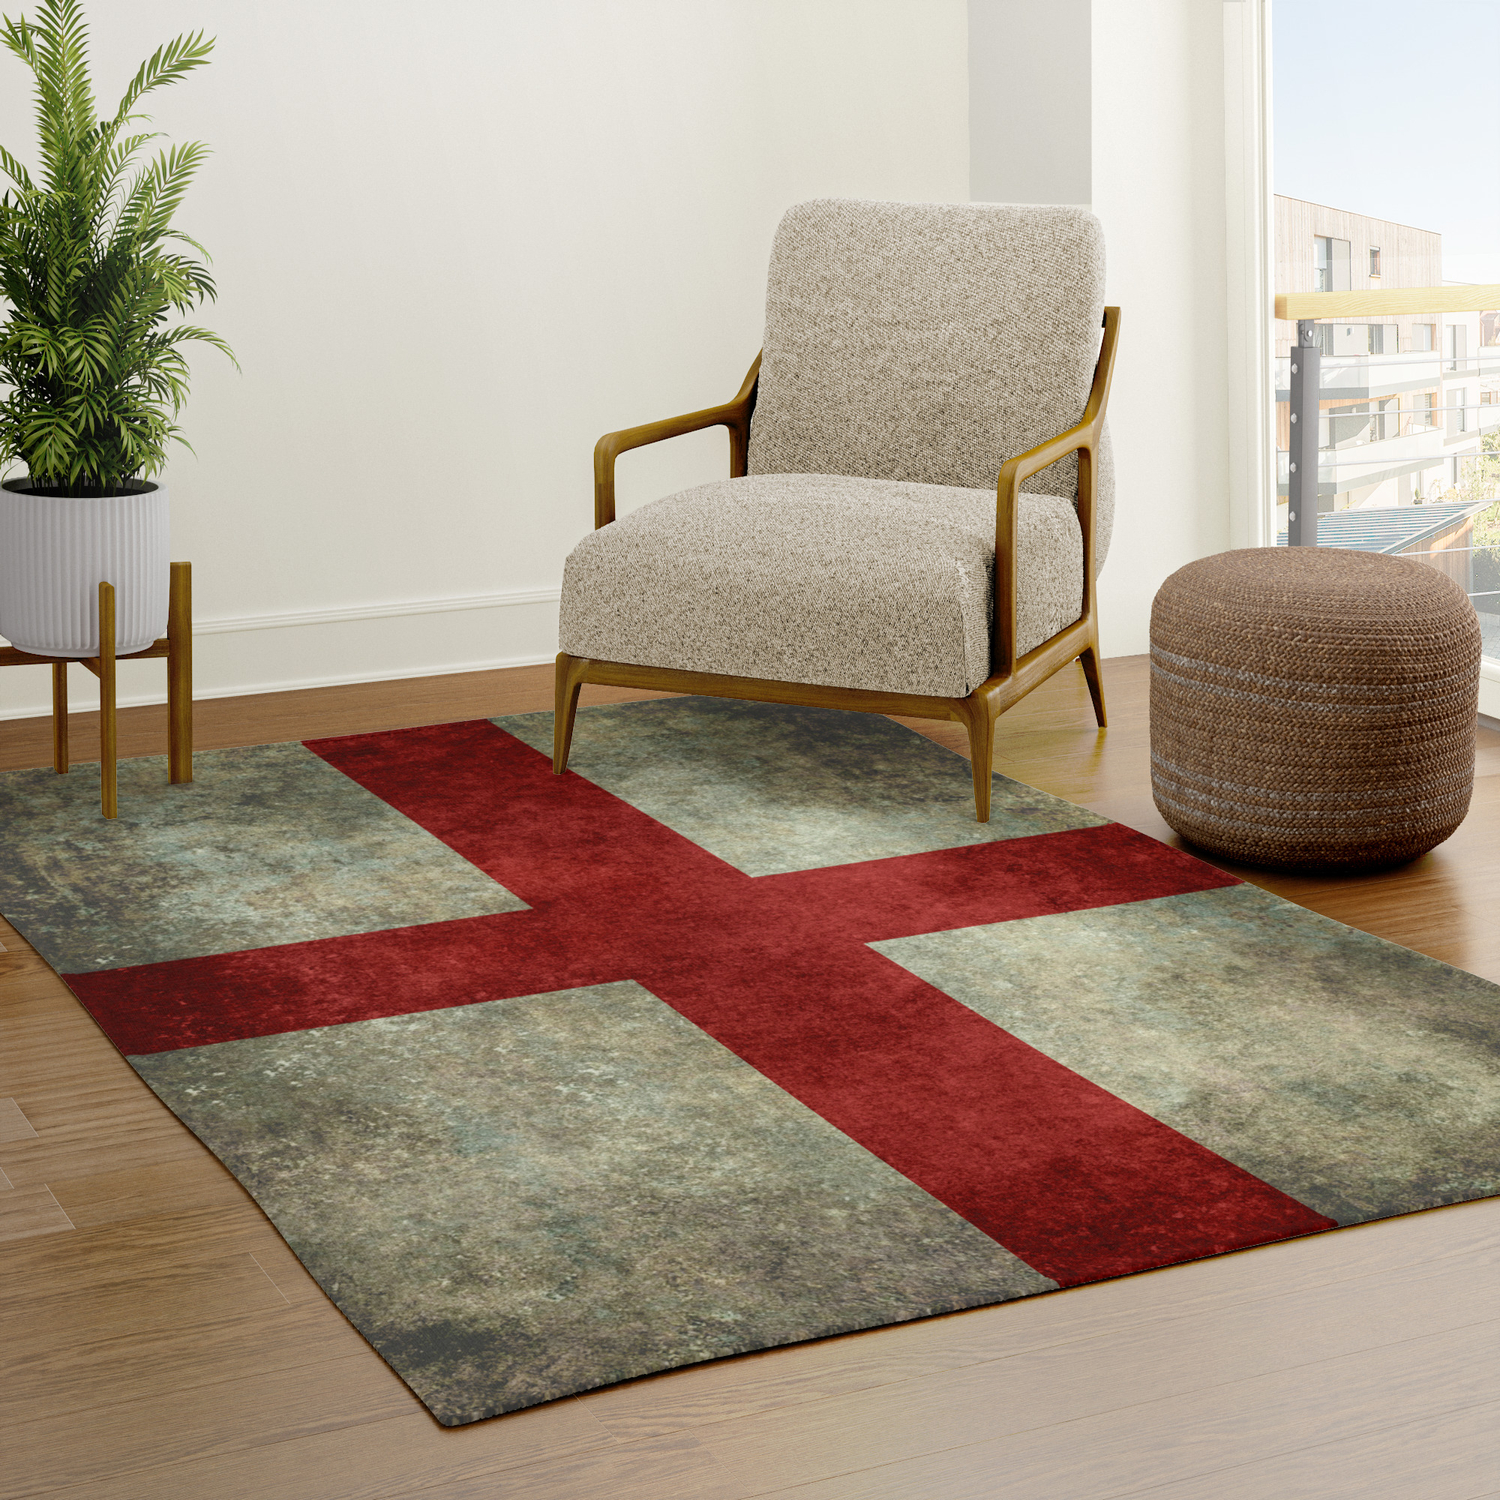 ALAZA British Flag Big Ben Bus England London Collection Area Mat Rug Rugs for Living Room Bedroom Kitchen 2' x 6' 